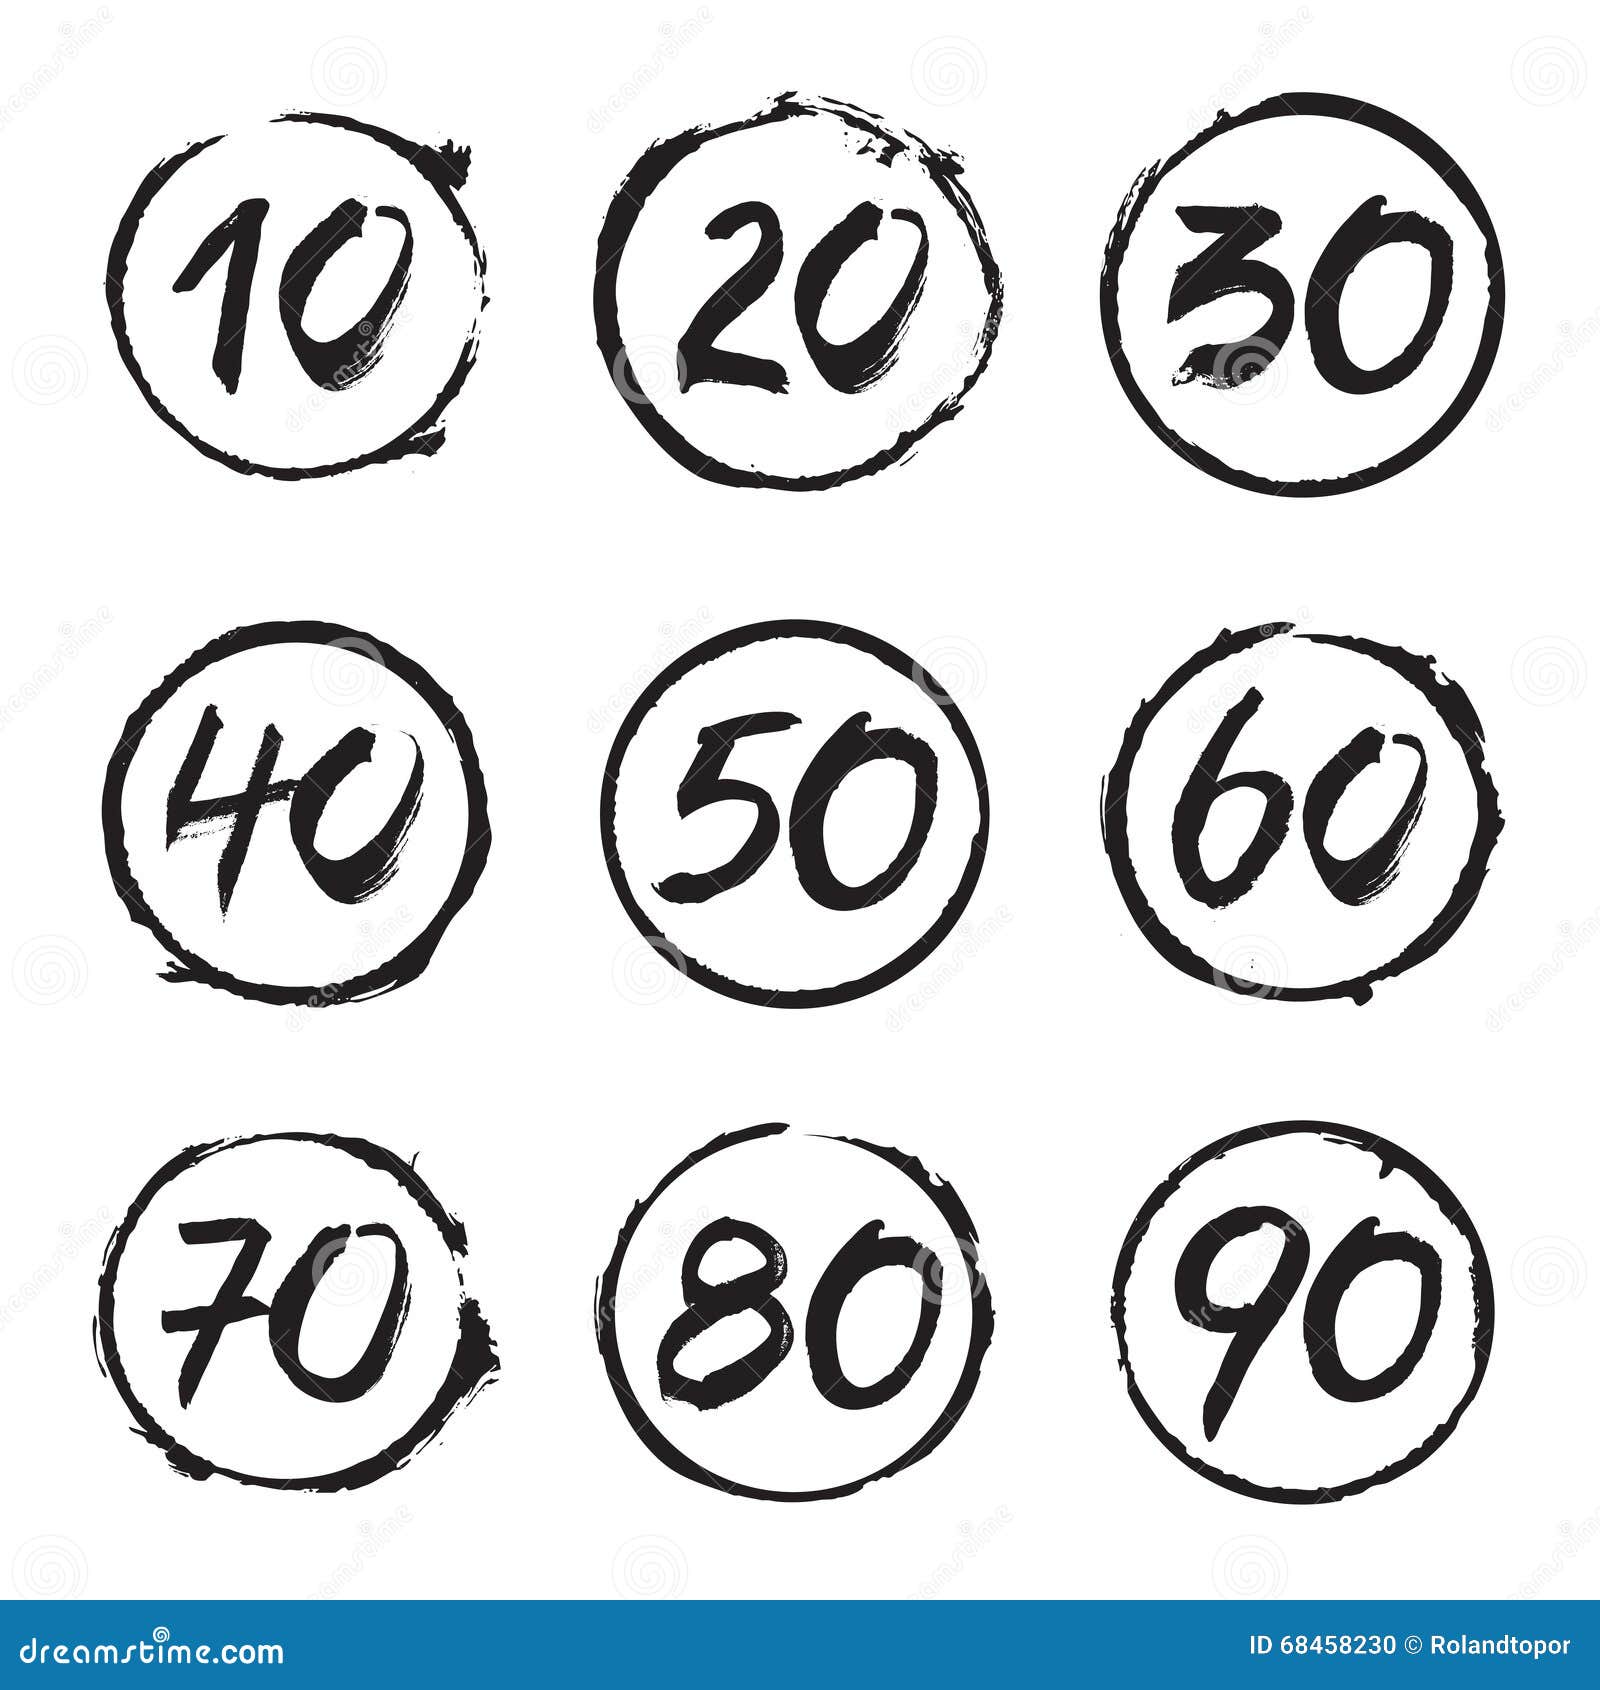 clipart numbers in circles - photo #20